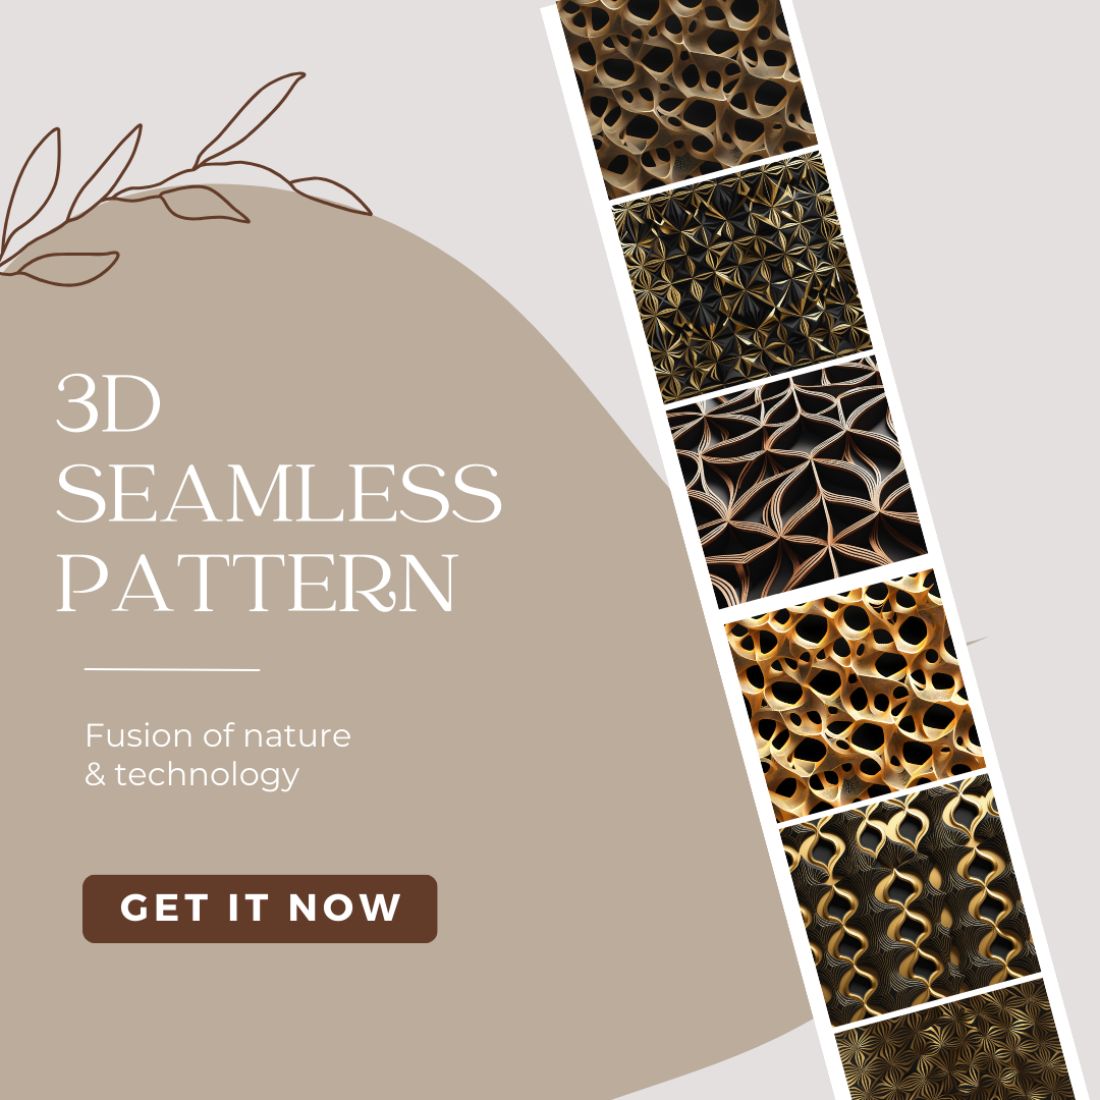 3D seamless pattern, Digital paper - Fusion of nature & technology preview image.